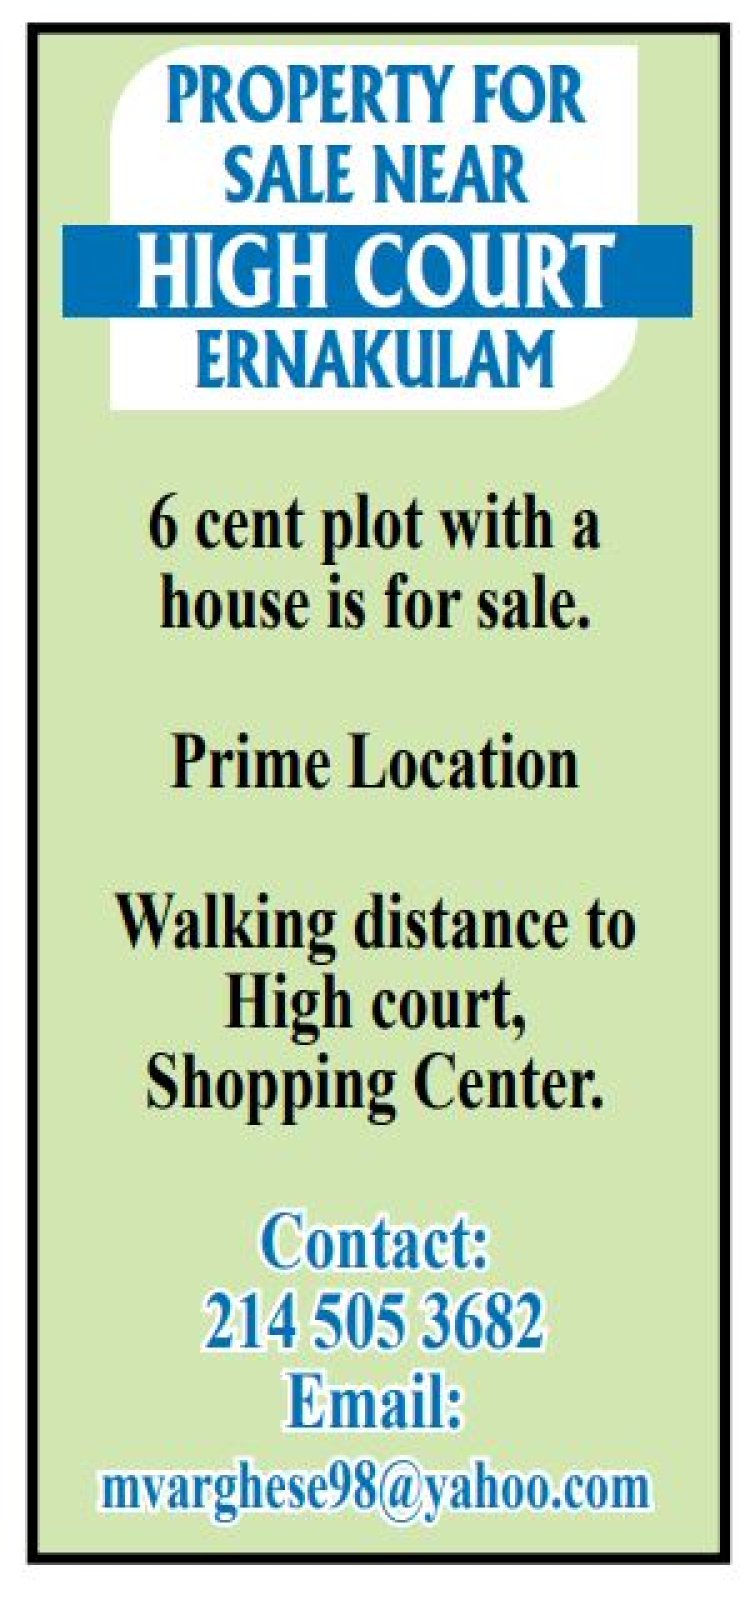 PROPERTY FOR SALE NEAR HIGH COURT